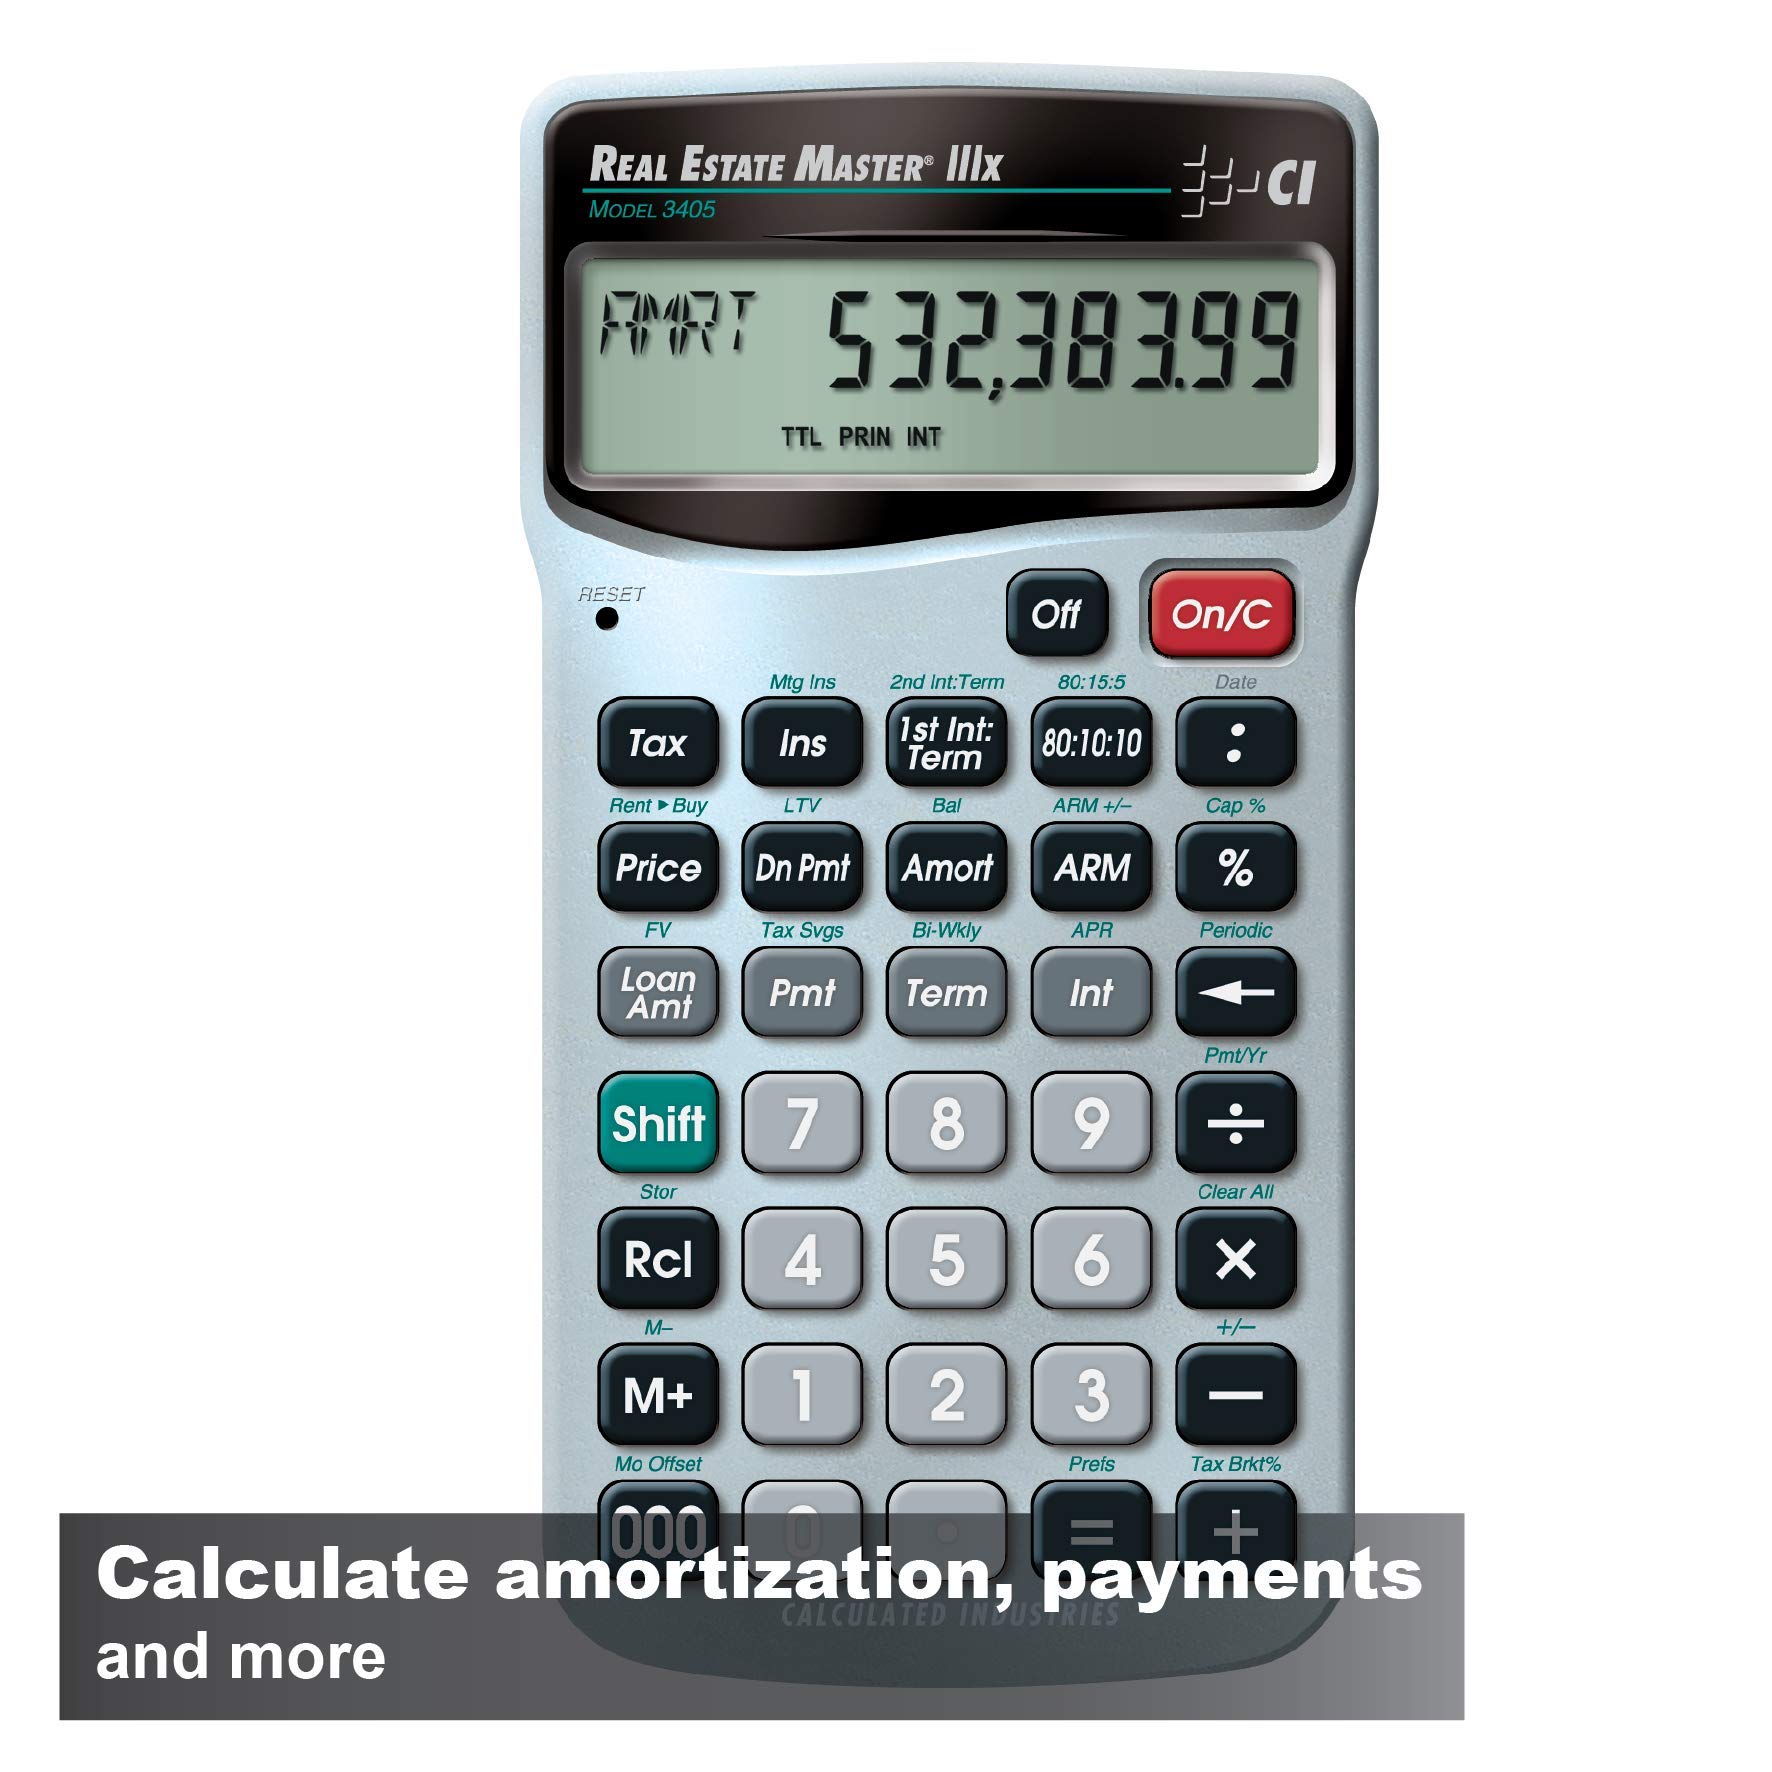 Calculated Industries 3405 Real Estate Master IIIx Residential Real Estate Finance Calculator | Clearly-Labeled Function Keys | Simplest Operation | Solves Payments, Amortizations, ARMs, Combos, More